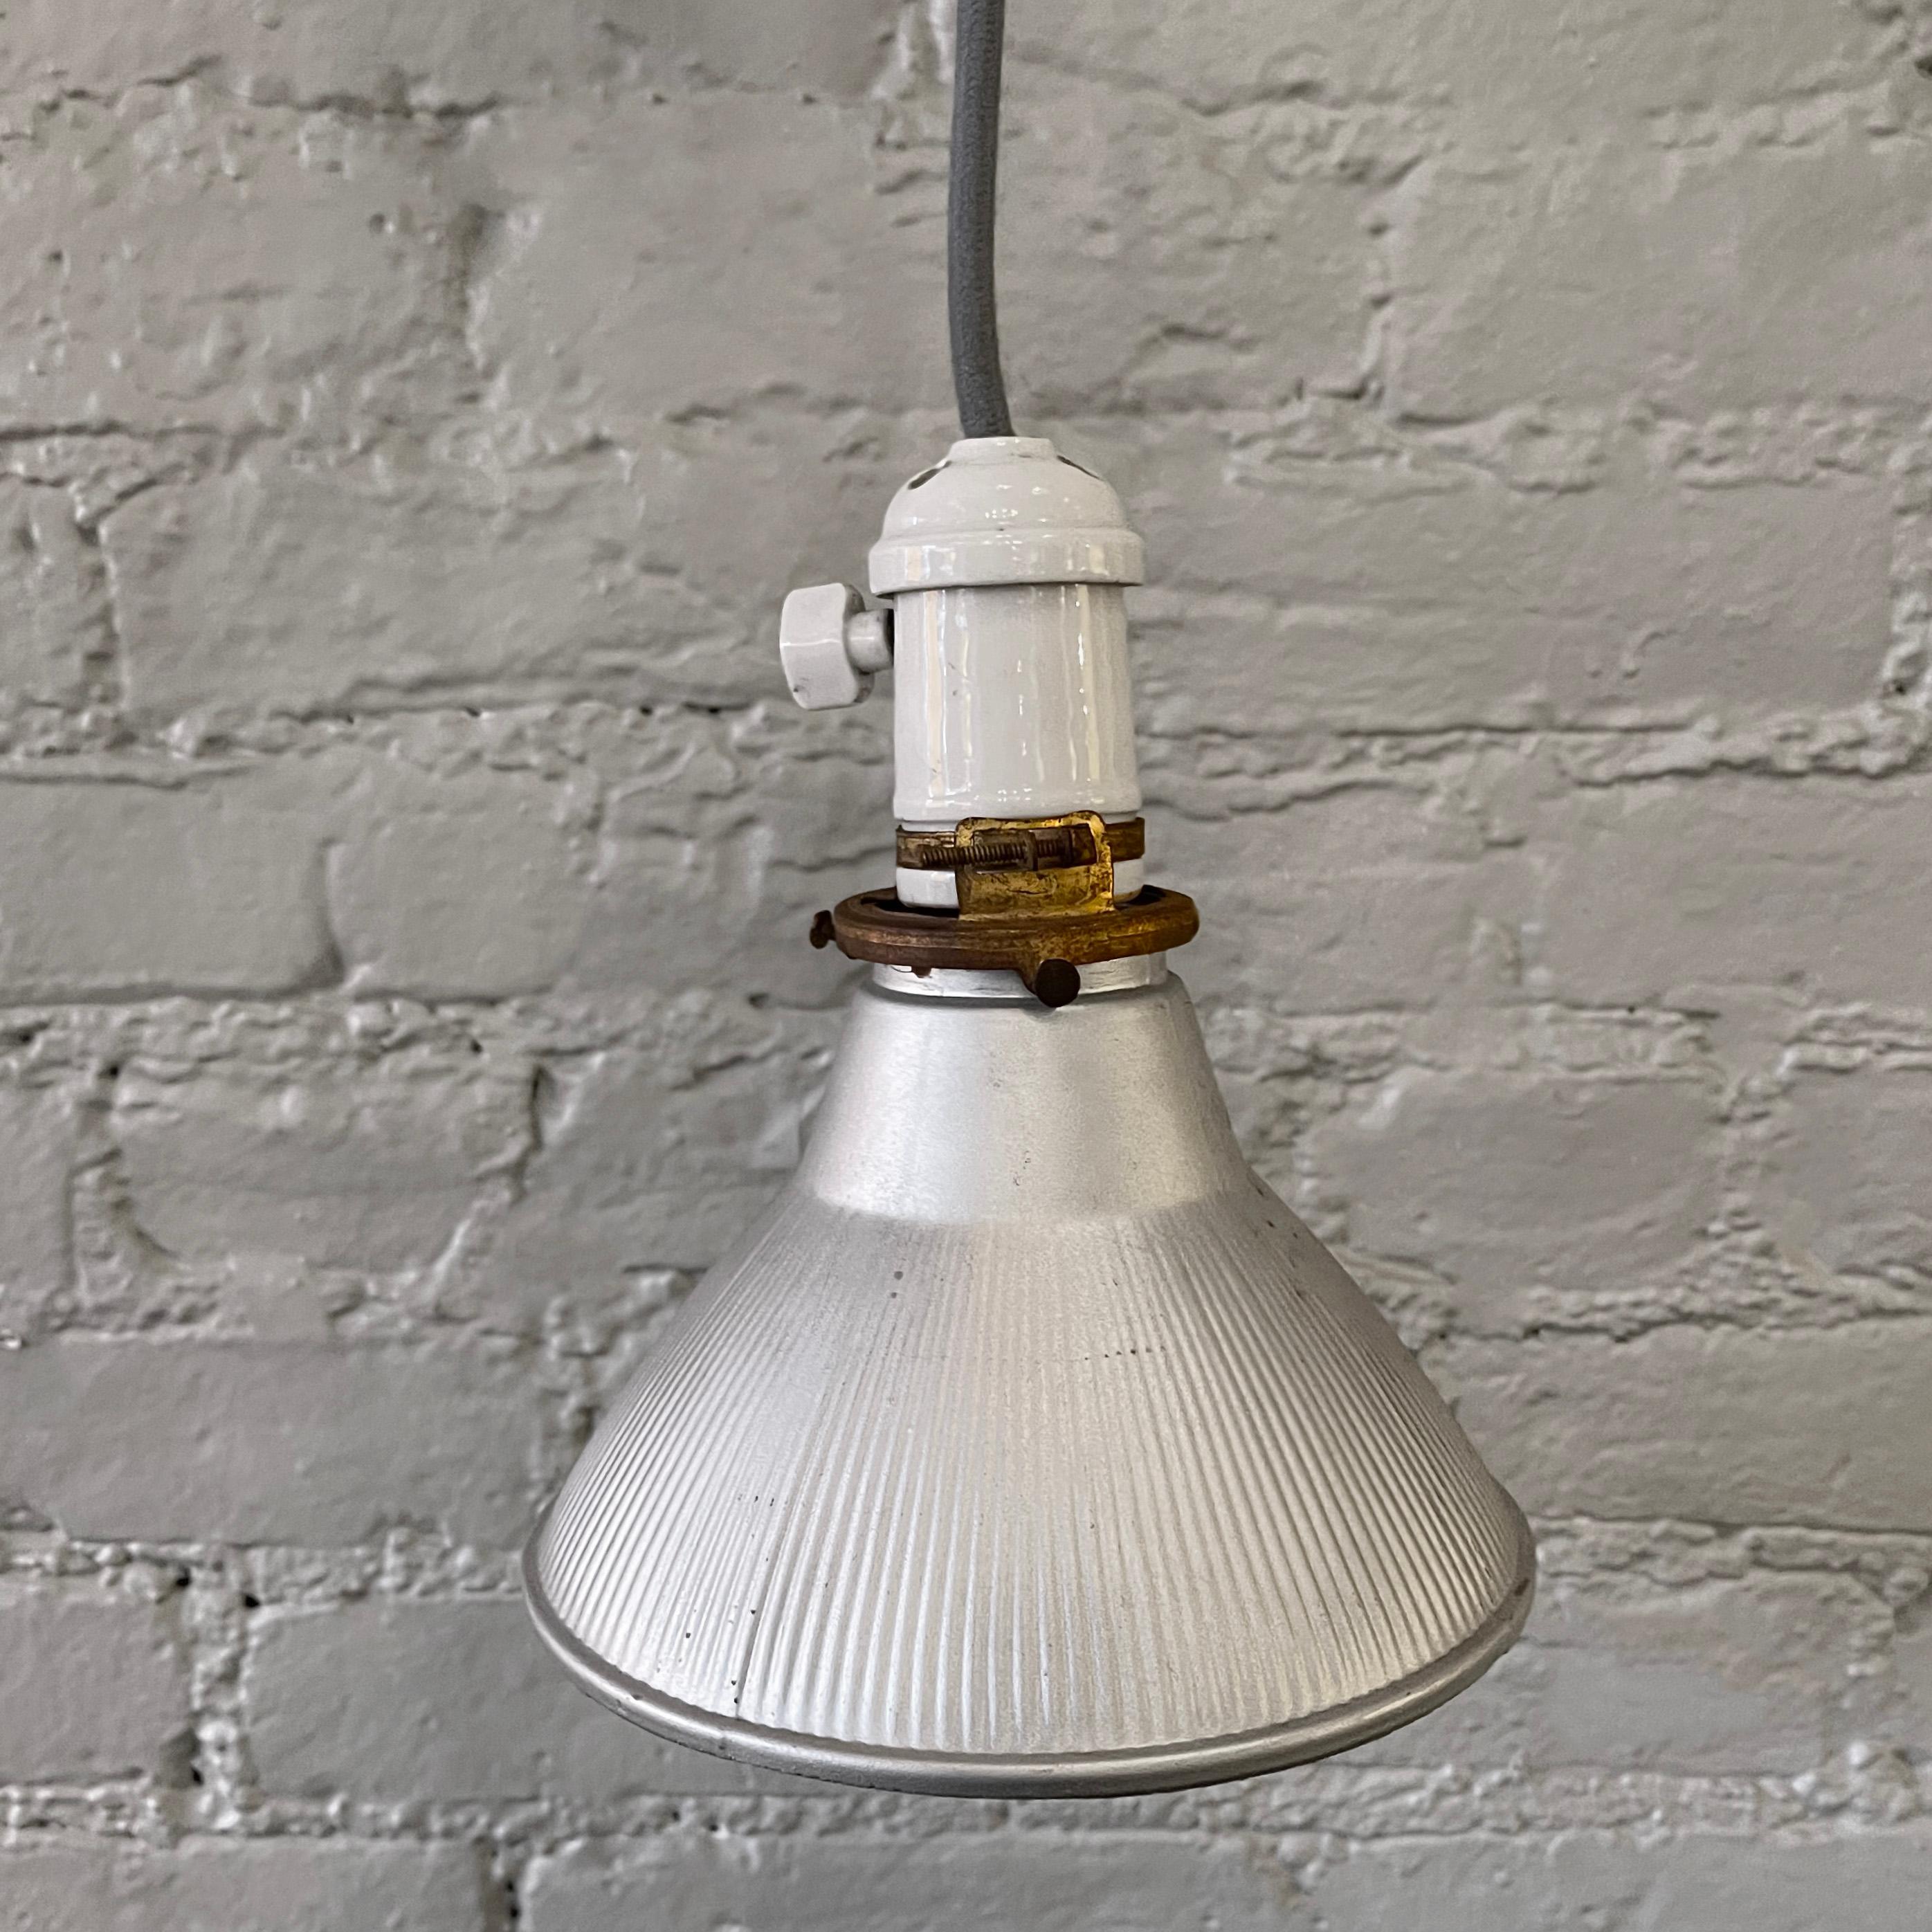 Early 20th century, X-Ray mercury glass bell pendant light features a matte silver exterior with reflective silver interior on a porcelain socket with brass fittings is newly wired with 36 inches of blue cord with matching porcelain canopy.